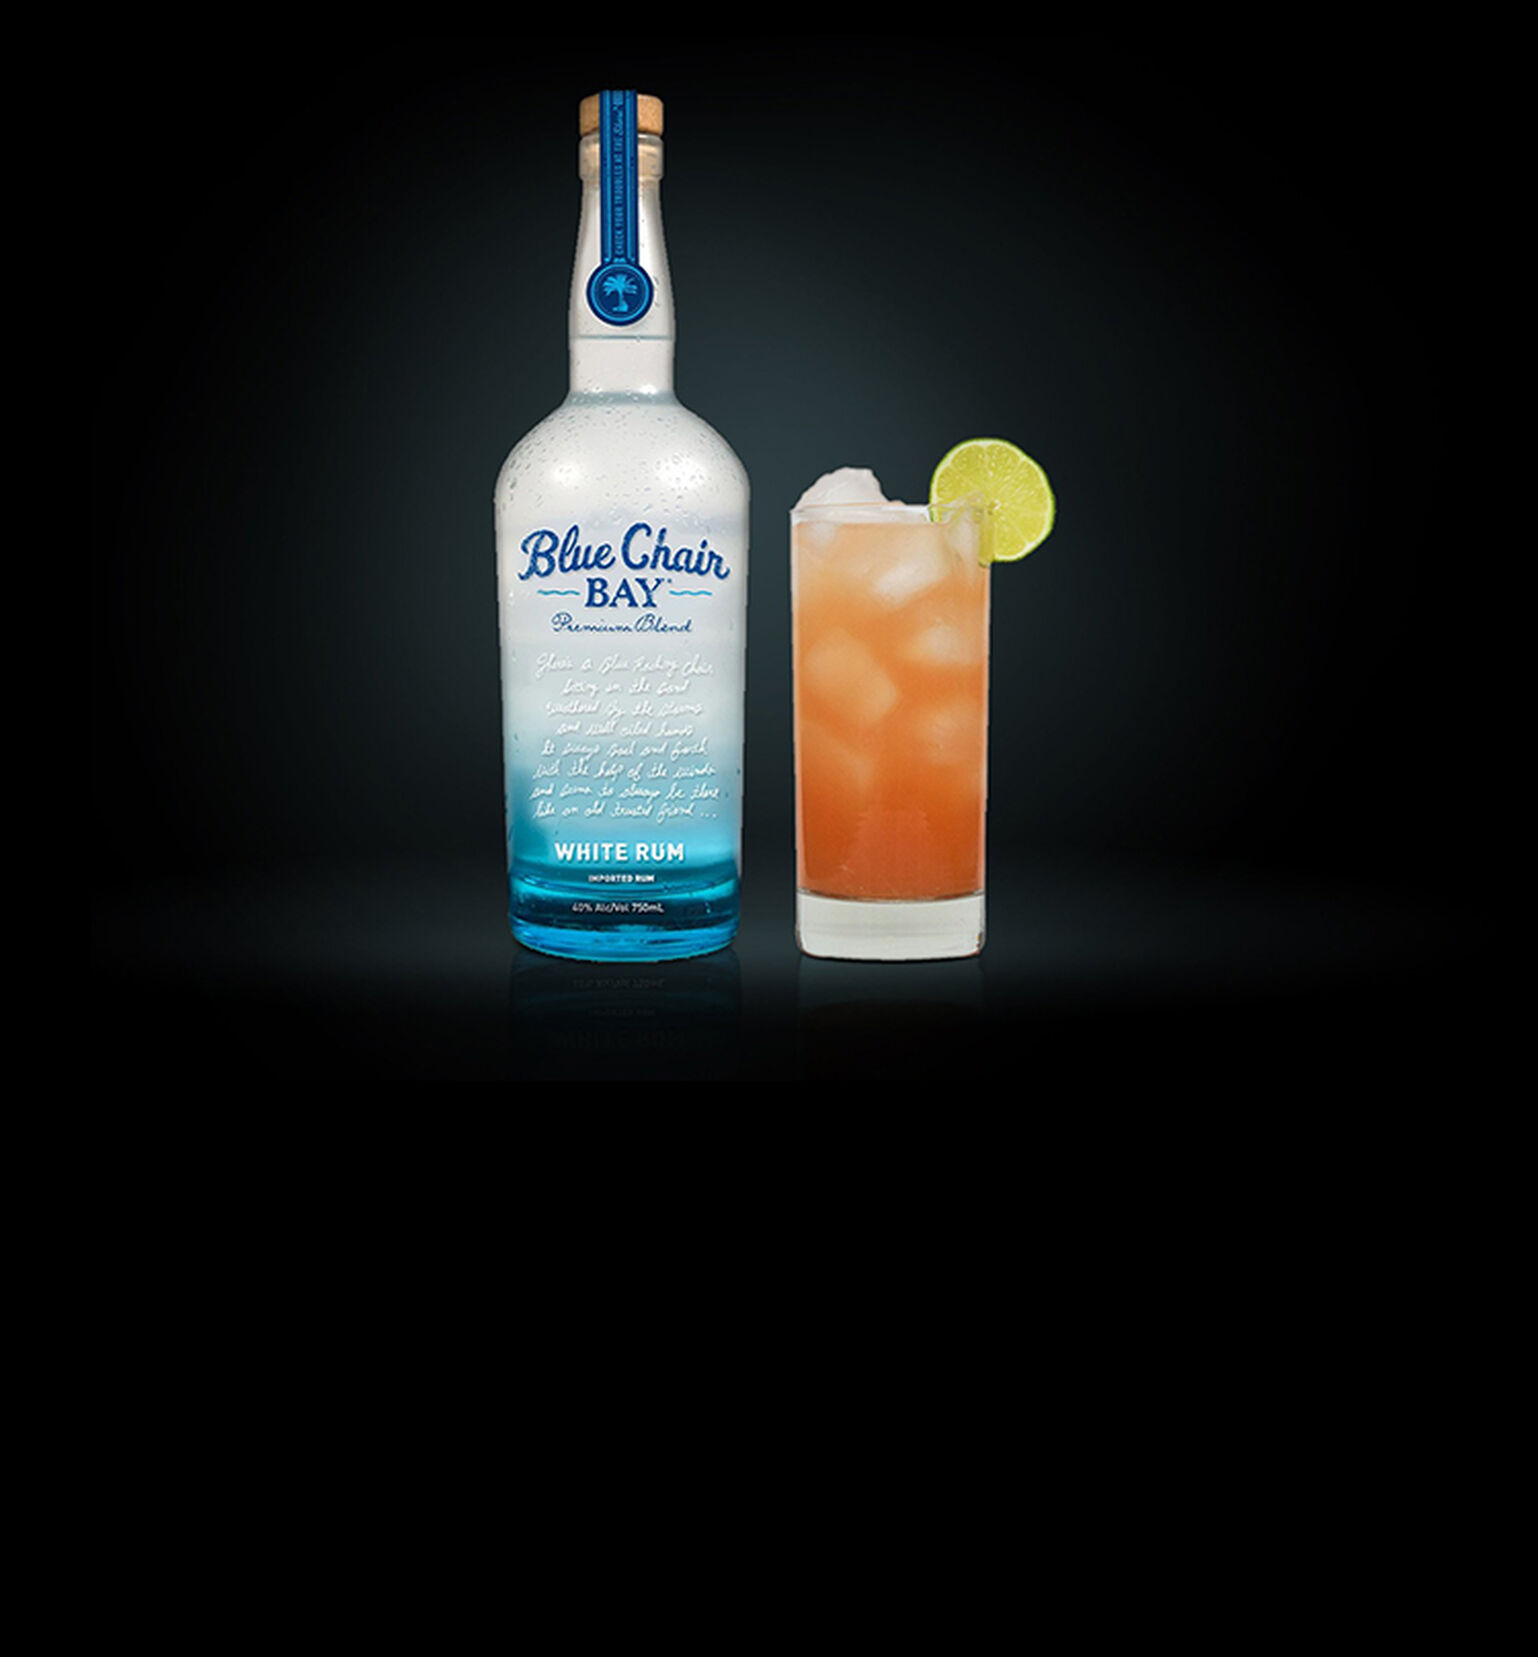 The Blue Chair Bay Rum Island Paloma Cocktail